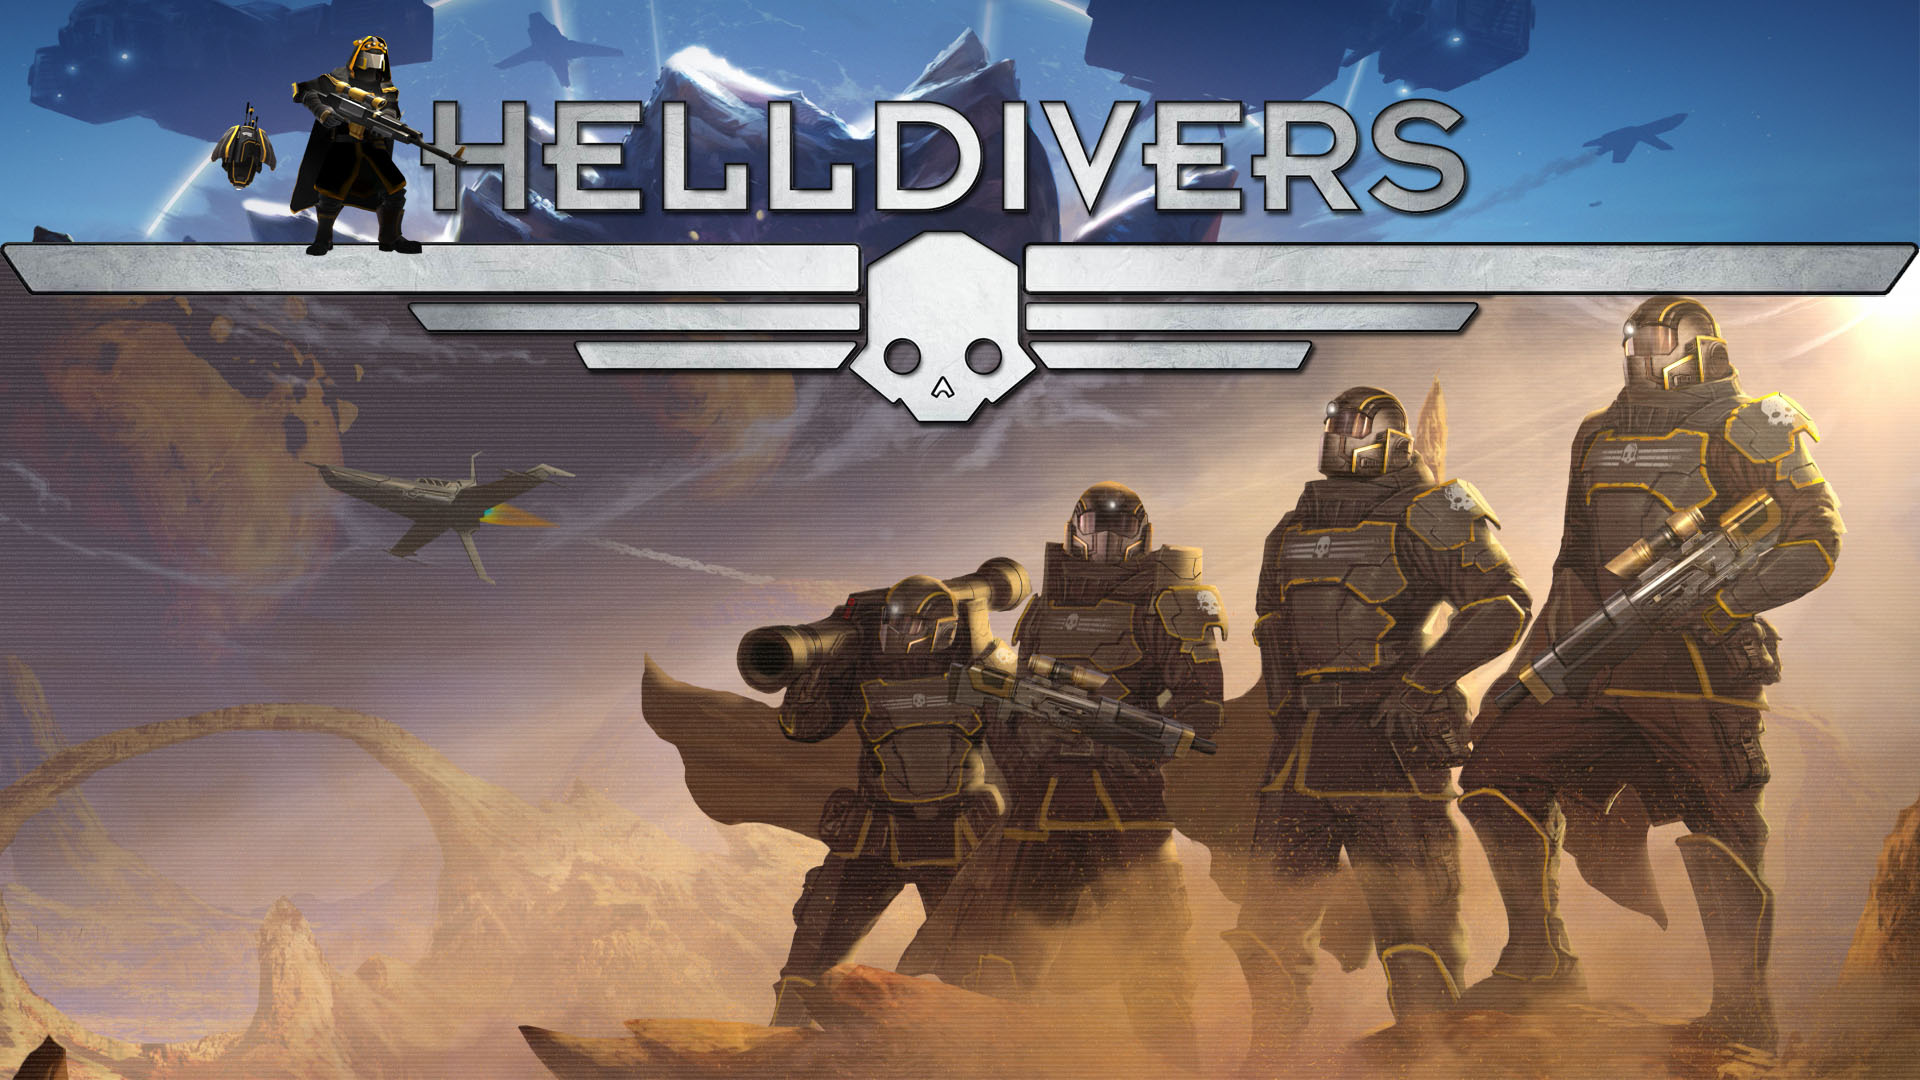 Helldivers tier list